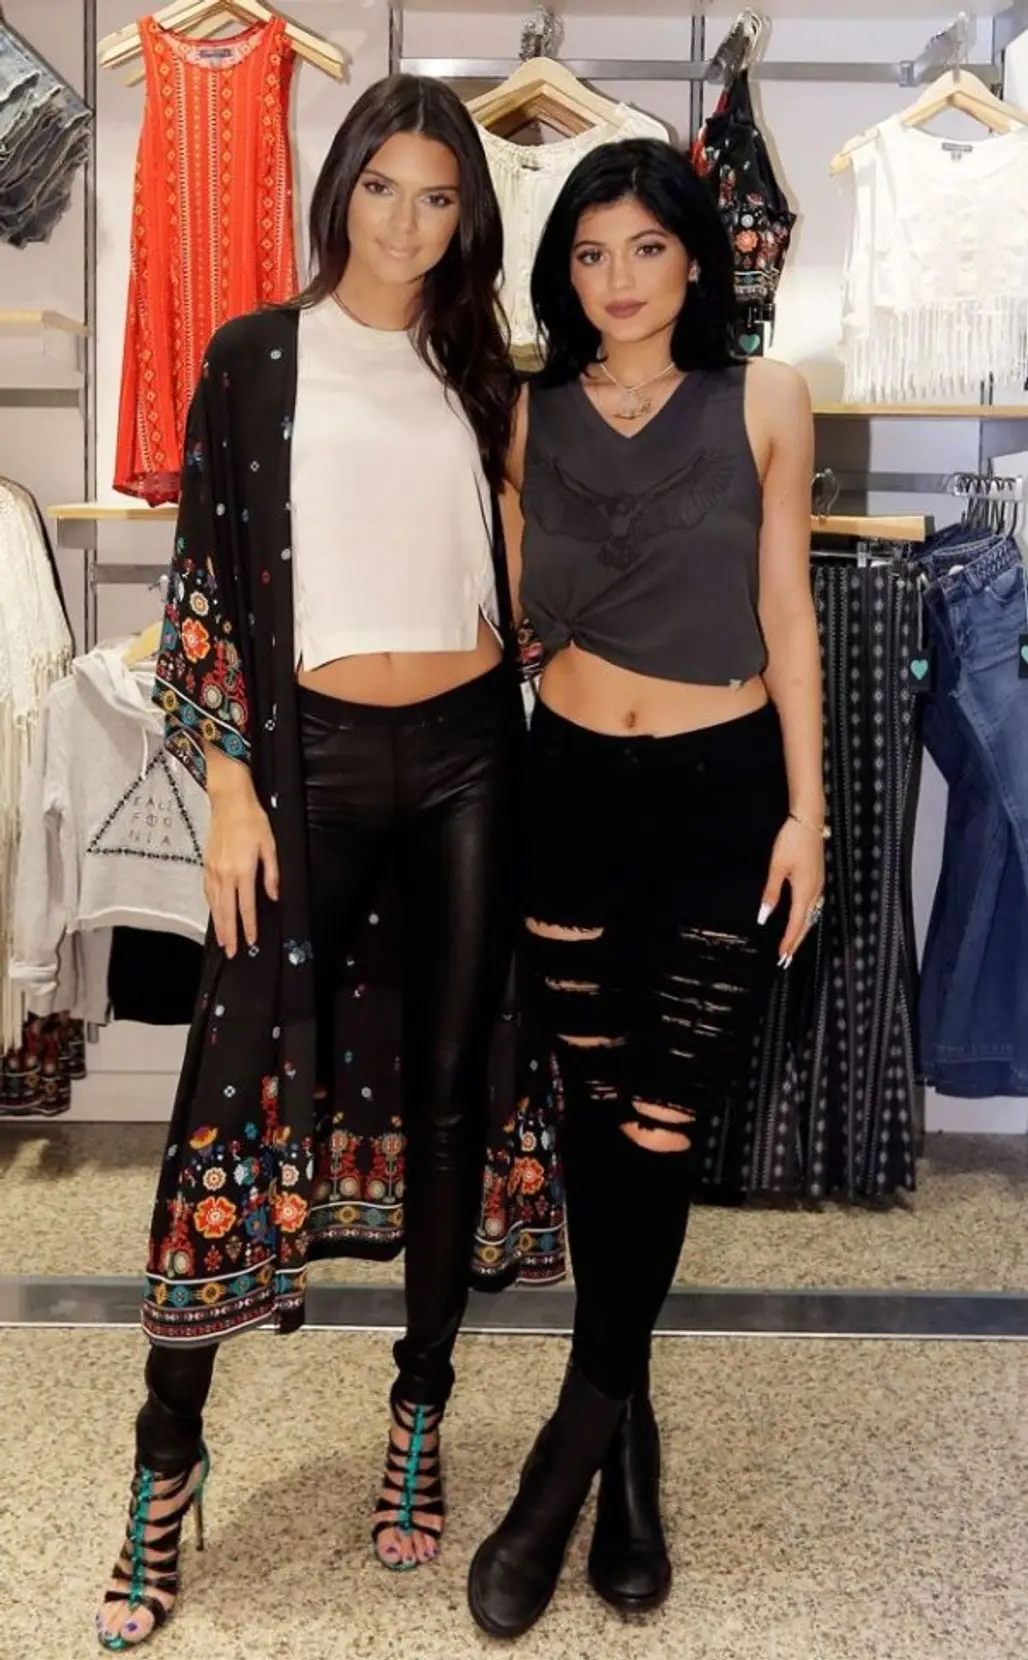 Kylie Jenner, 17, and Kendall Jenner, 18